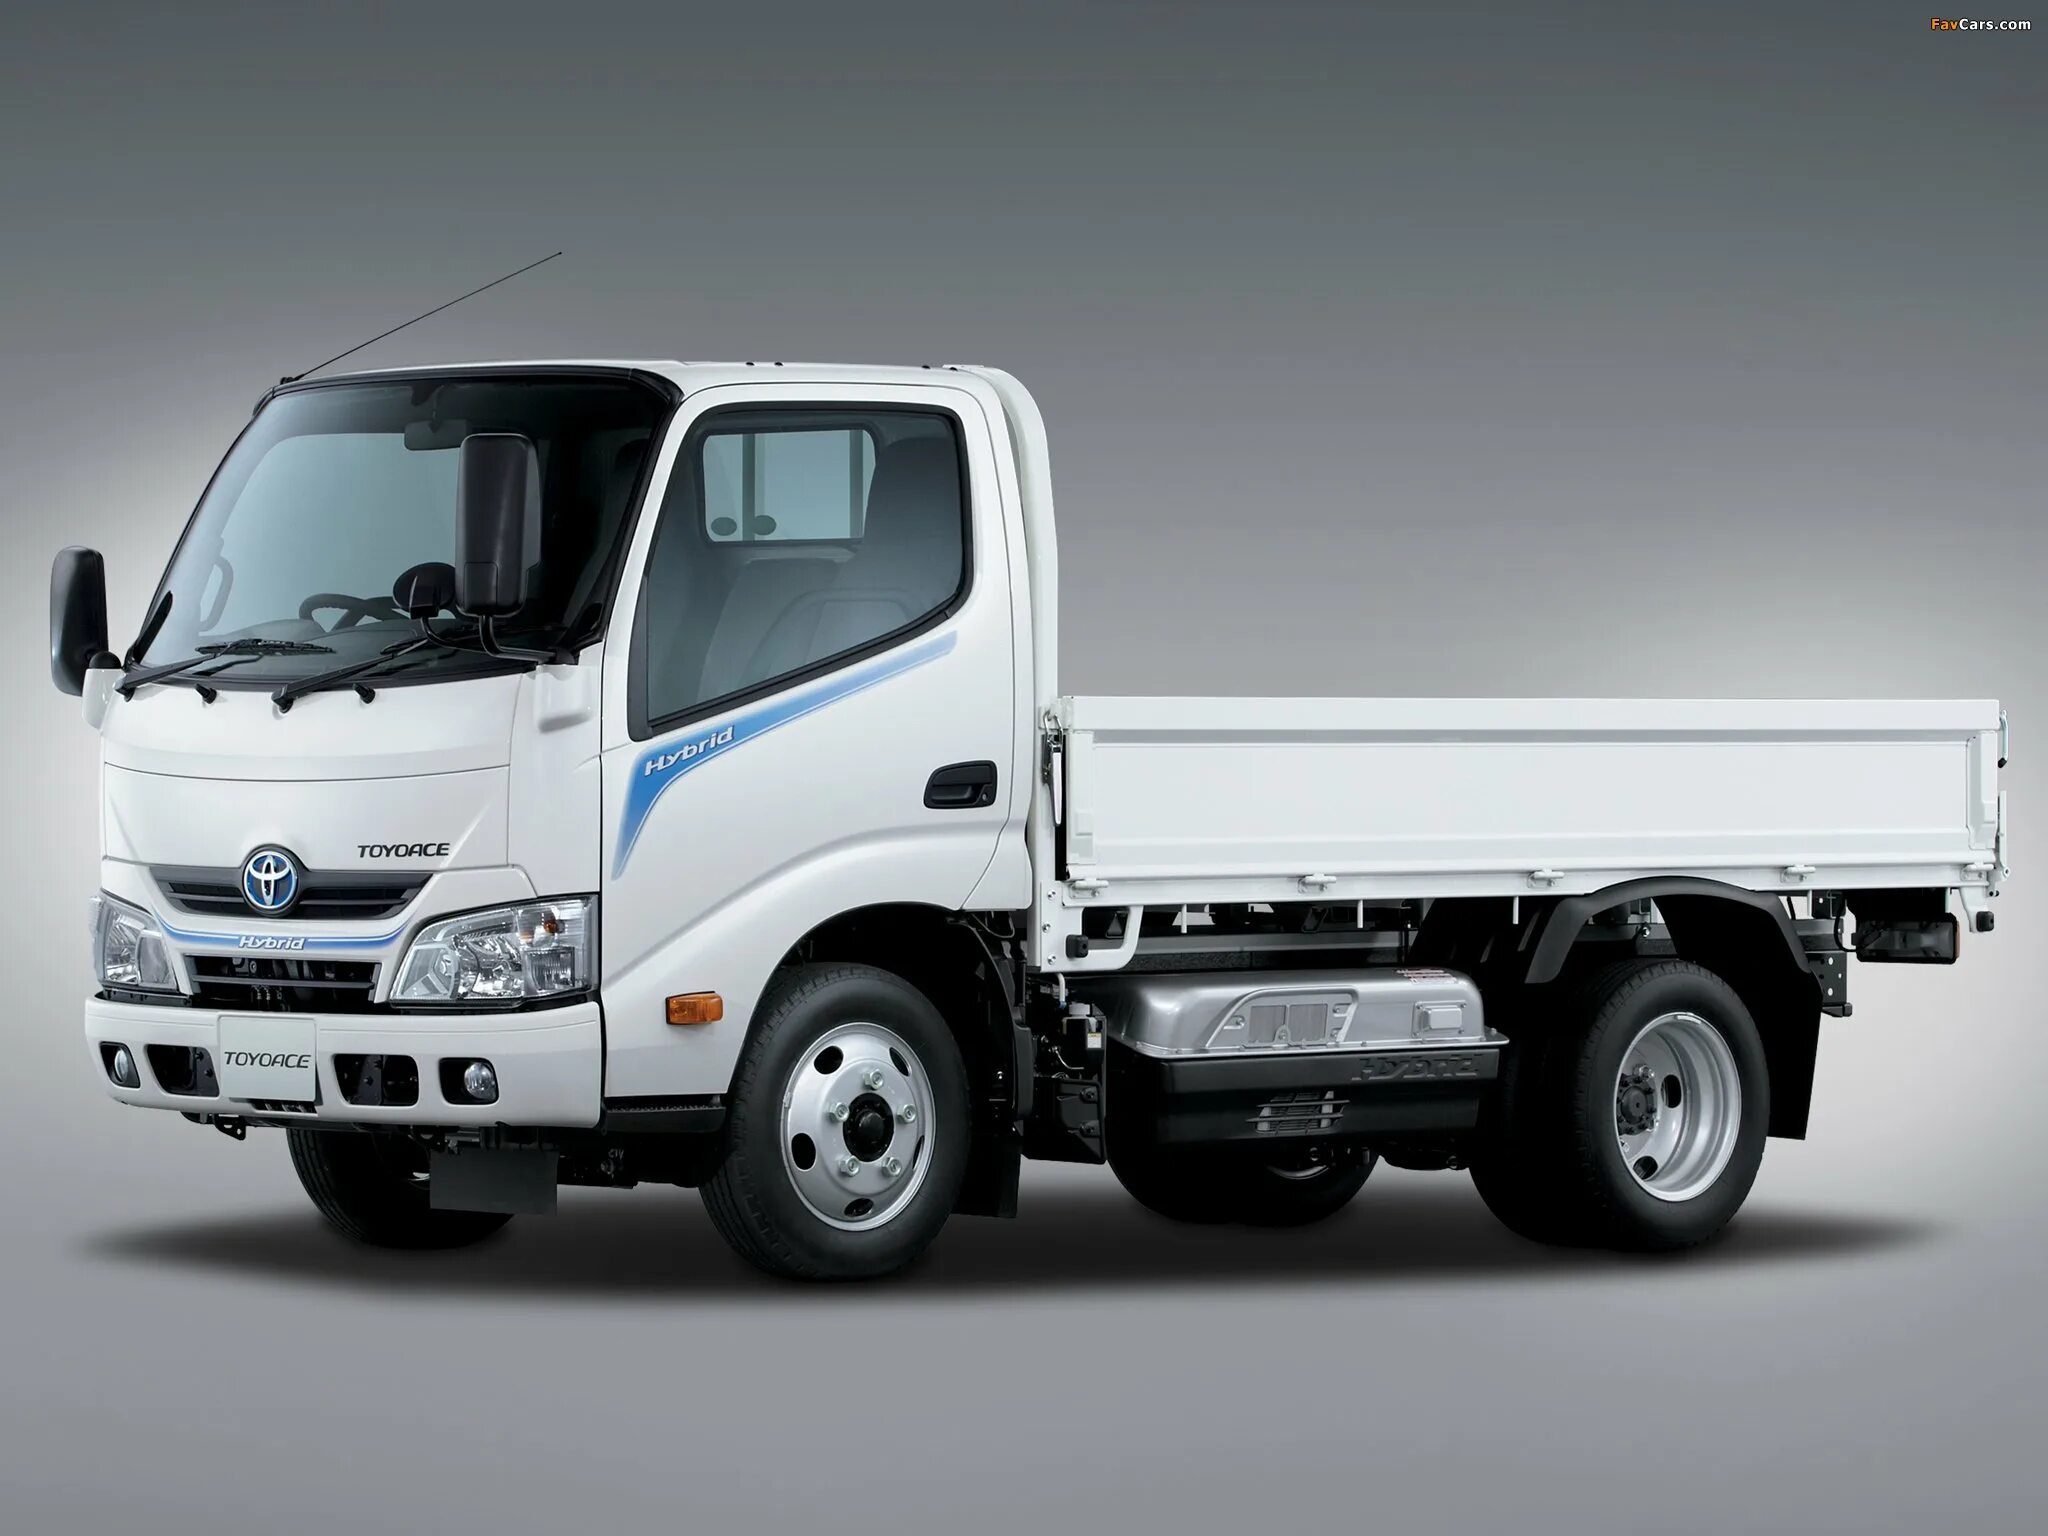 Toyota Toyo. Toyota TOYOACE. Toyota Dyna TOYOACE. Toyota TOYOACE 4wd.